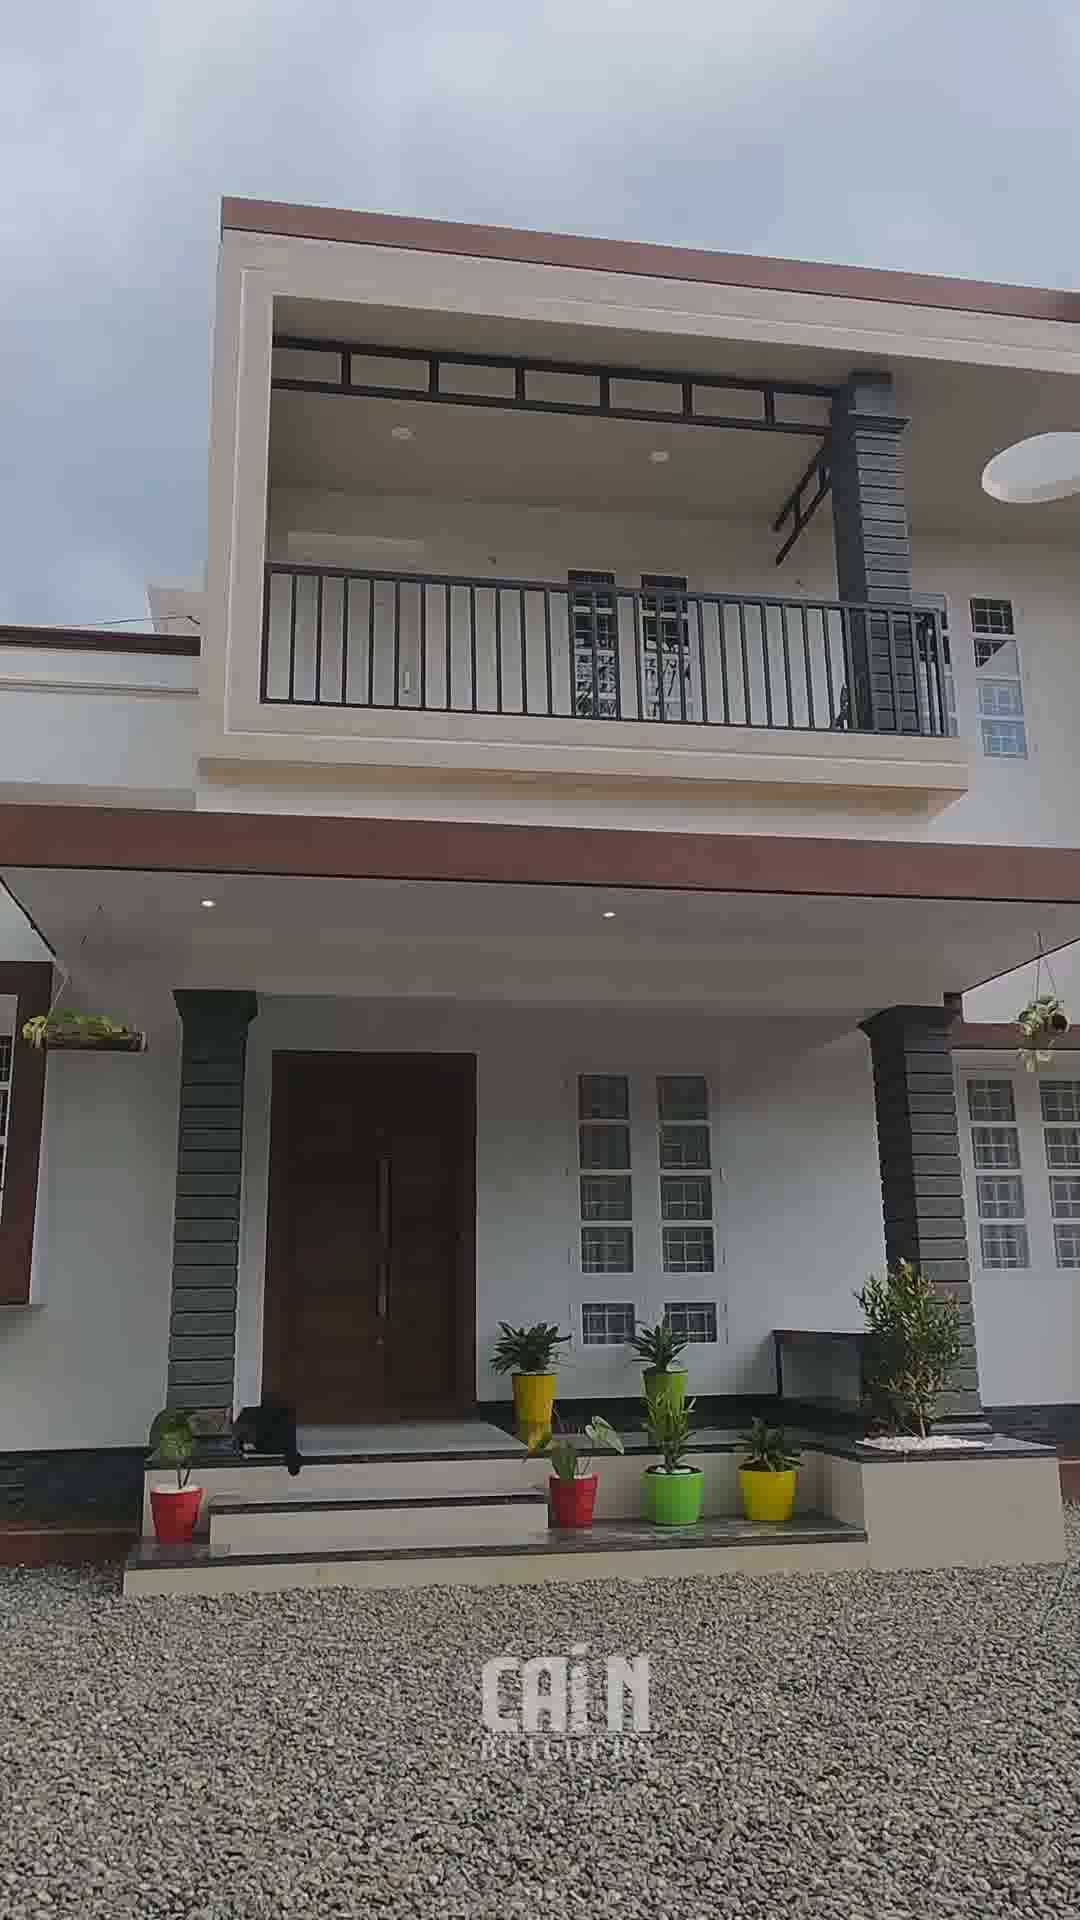 1900/4 bhk/Modern style
10 cent/double storey/Ernakulam

Project Name: 4 bhk,Modern style house 
Storey: double
Total Area: 1900
Bed Room: 4 bhk
Elevation Style: Modern
Location: Ernakulam
Completed Year: 

Cost: 35 lakh
Plot Size: 10 cent